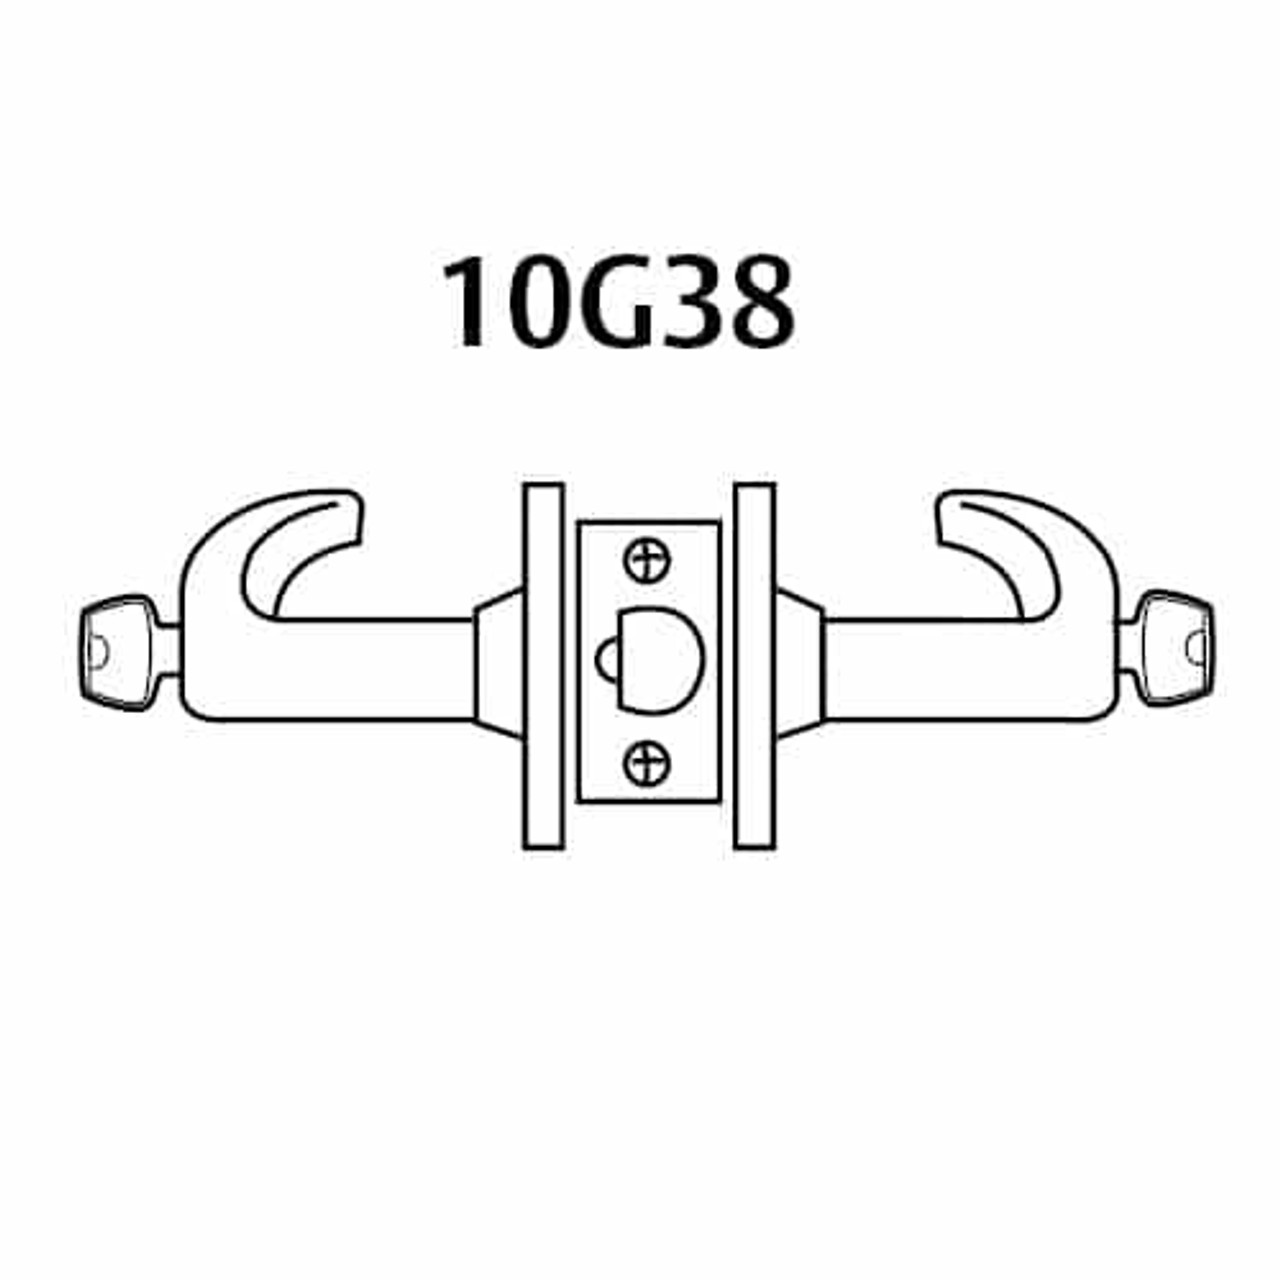 2860-10G38-LB-03 Sargent 10 Line Cylindrical Classroom Locks with B Lever Design and L Rose Prepped for LFIC in Bright Brass